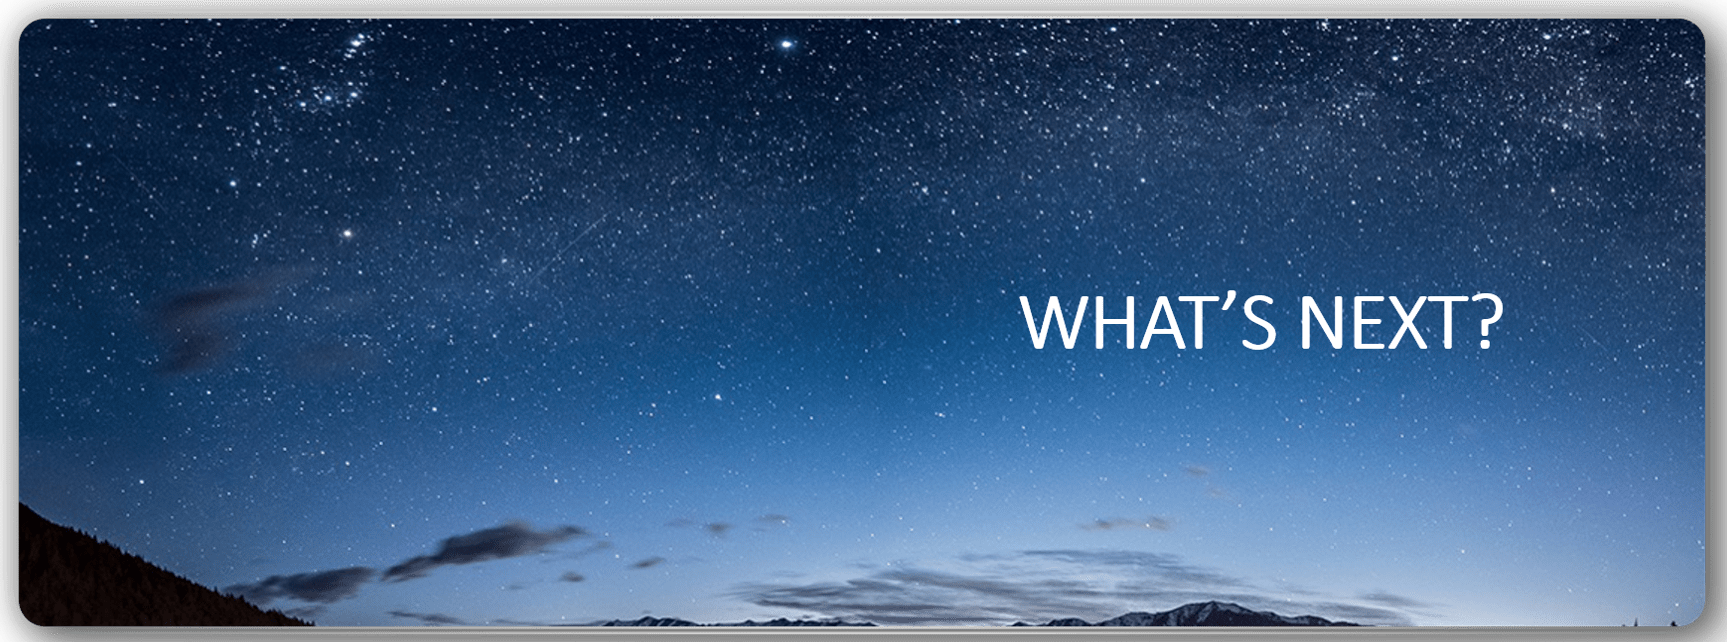 photo of the night sky with the words "What's next?"